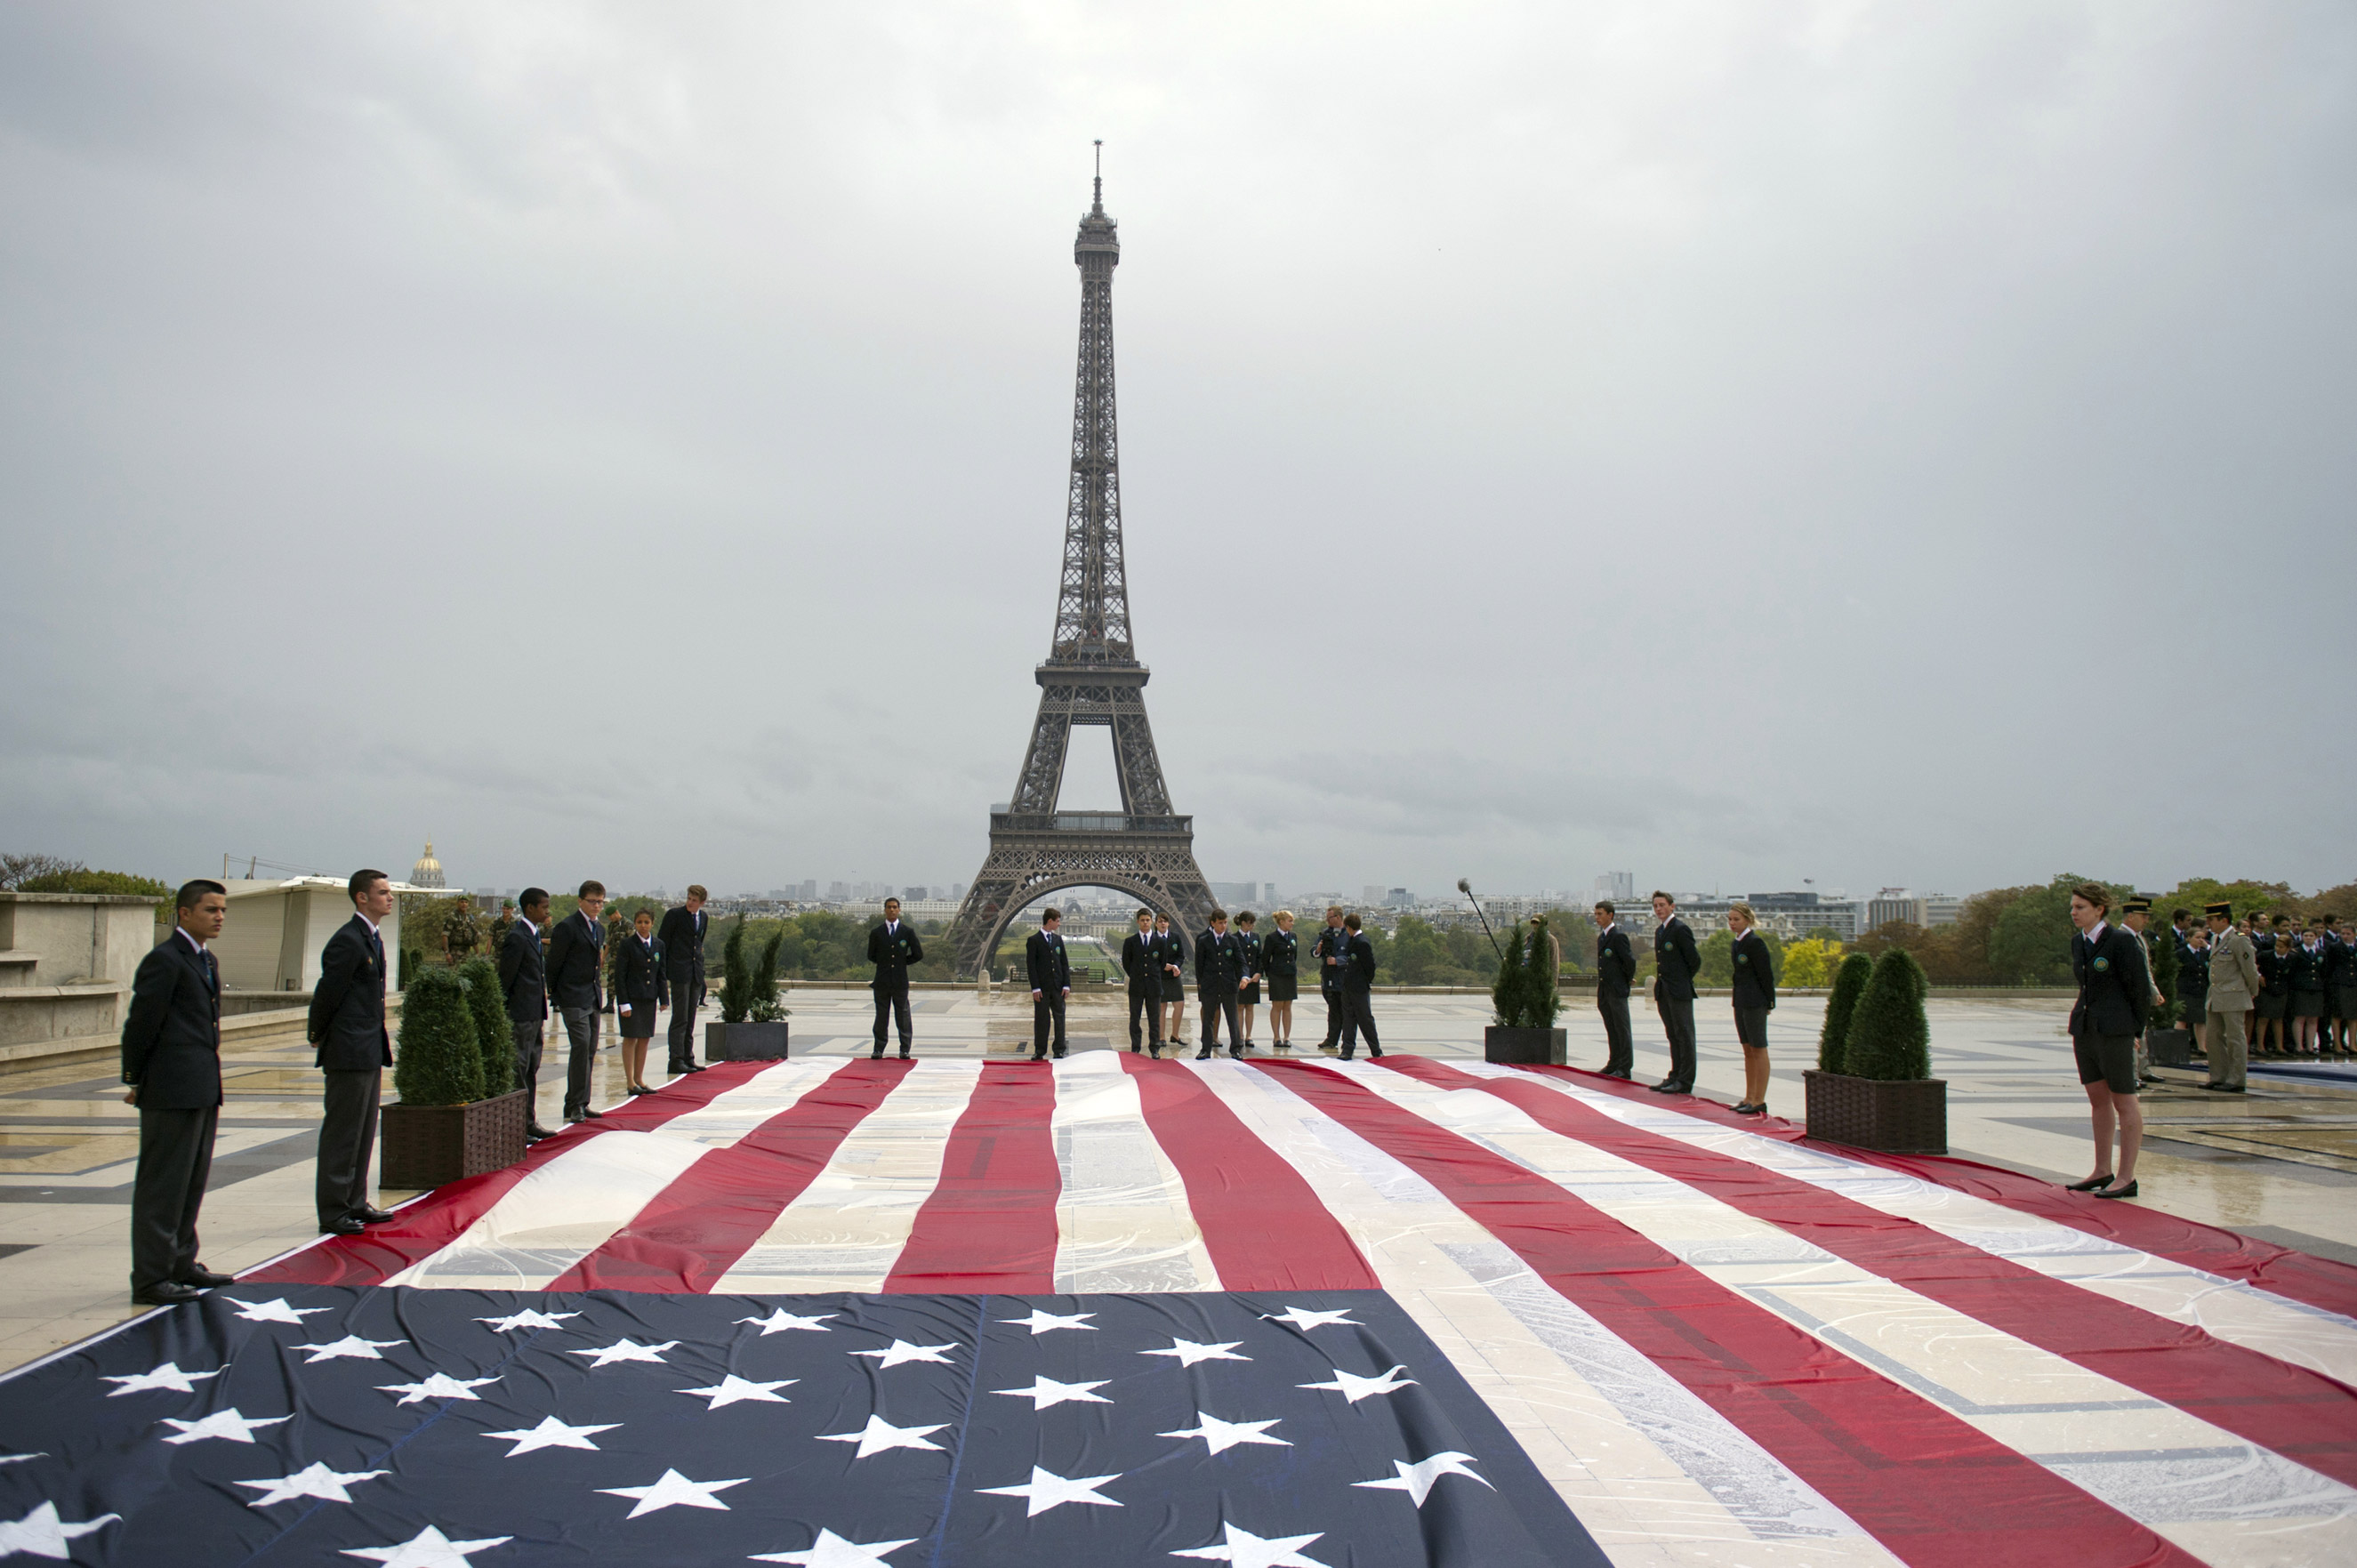 Student officers display an American flag on the Trocadero square with the Eiffel tower in the background during a solemn tribute to the victims of the 9/11 attacks on Sept. 11, 2011 in Paris. (Fred Dufour—AFP/Getty Images)